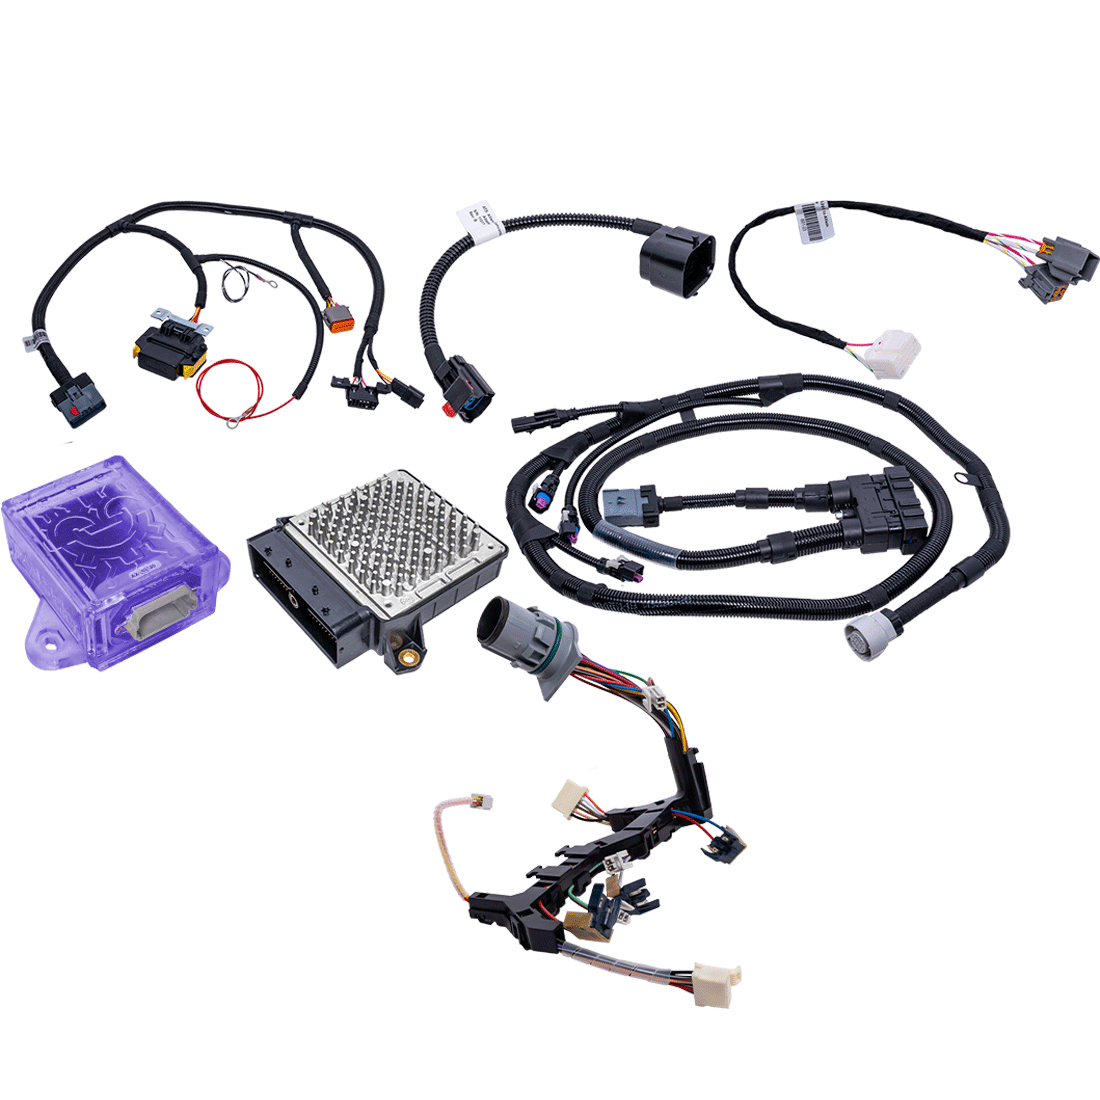 ATS 3190532326 Electronics Upgrade Kit Allison Conversion 68RFE 2007.5-2009 2011-2019 6 Speed Allison Used in Conversion